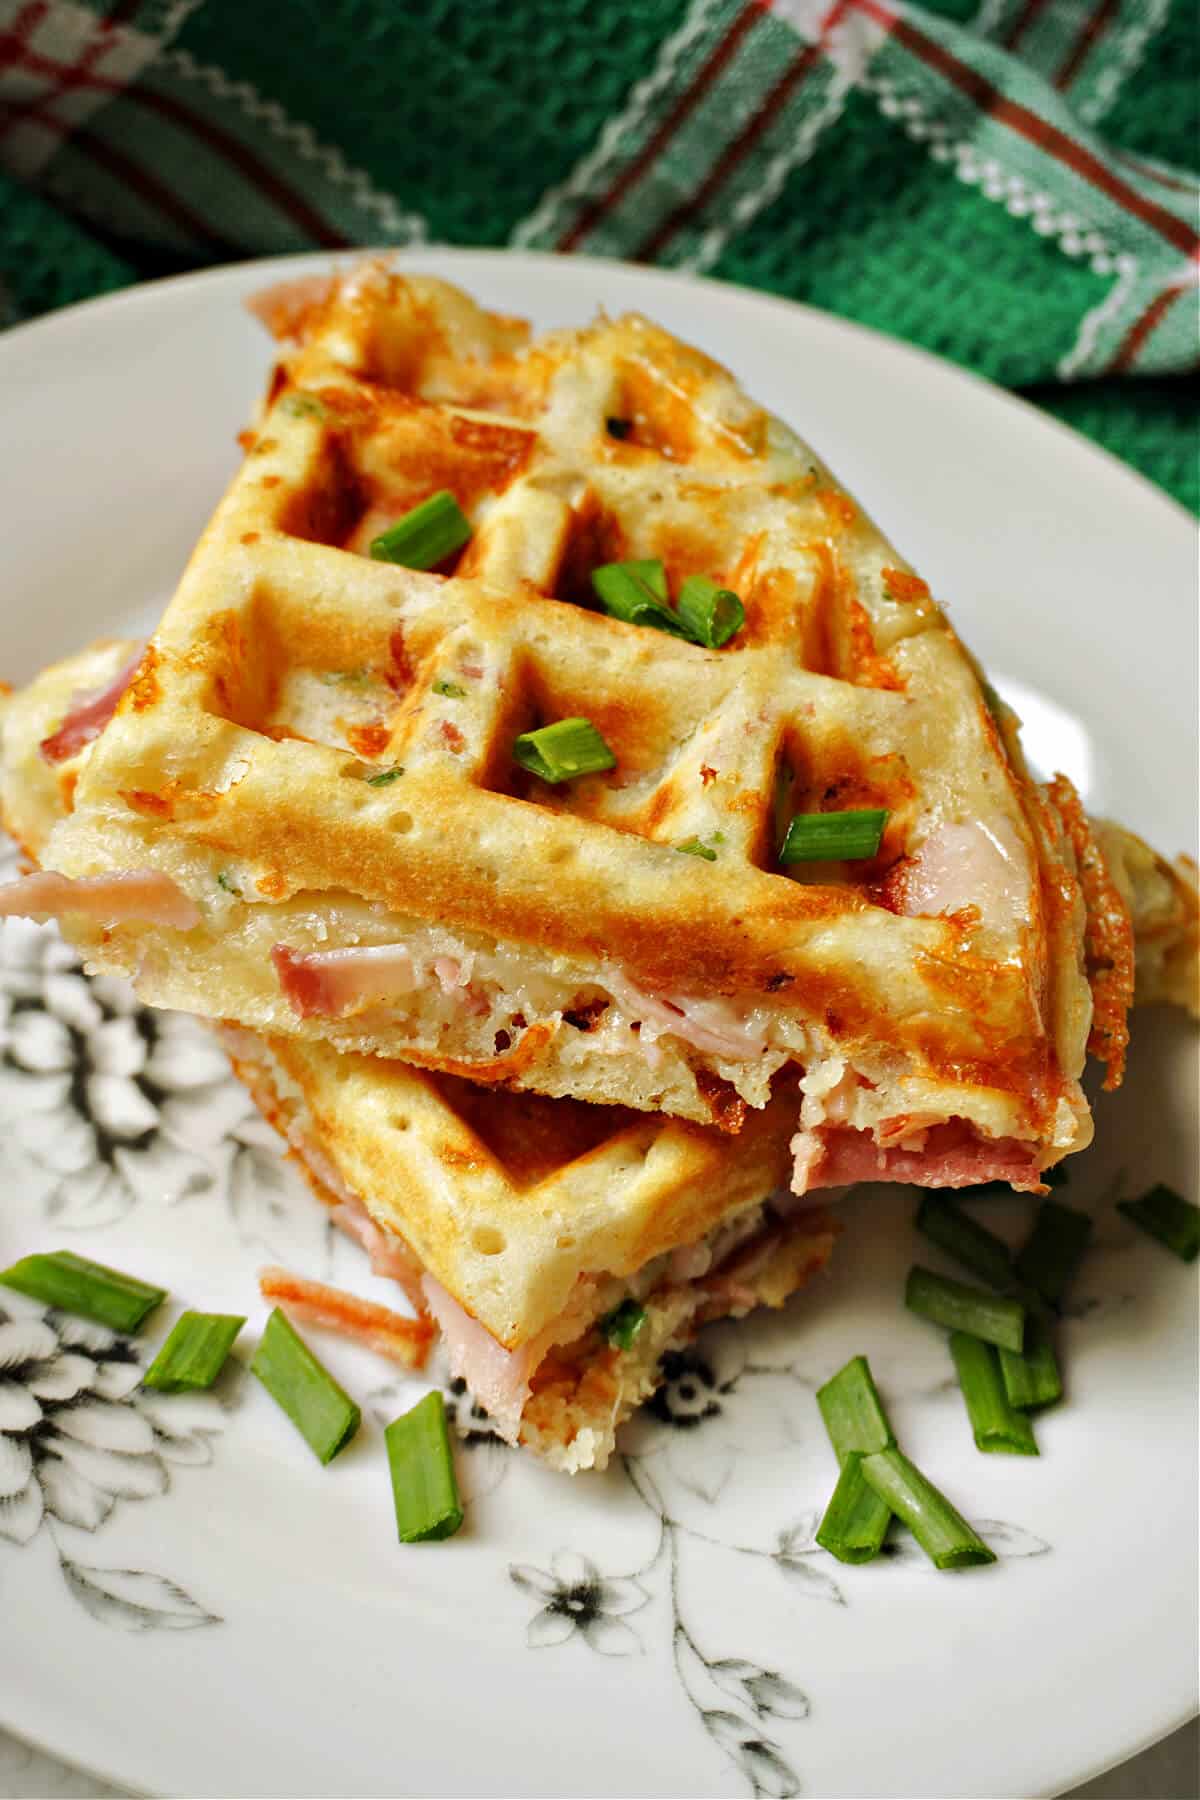 A stack of 2 waffles garnished with chopped spring onions on a plate.